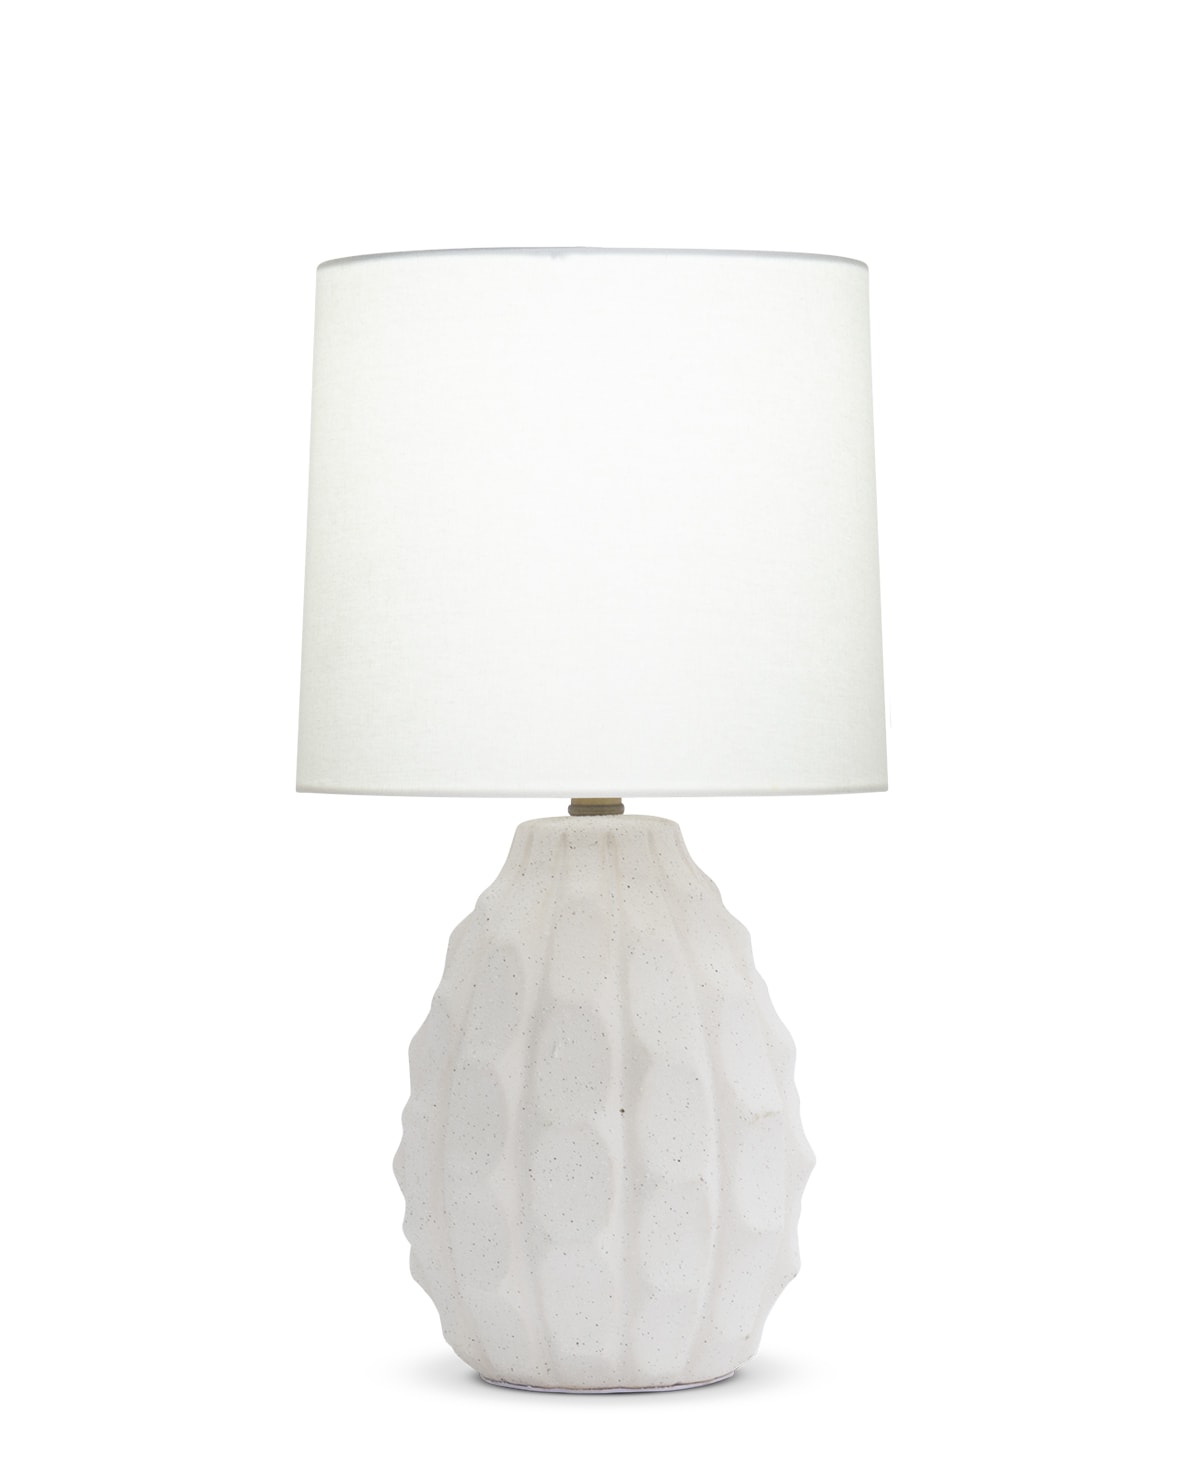 FlowDecor Smith Table Lamp in ceramic with off-white textured and off-white linen tapered drum shade (# 4575)